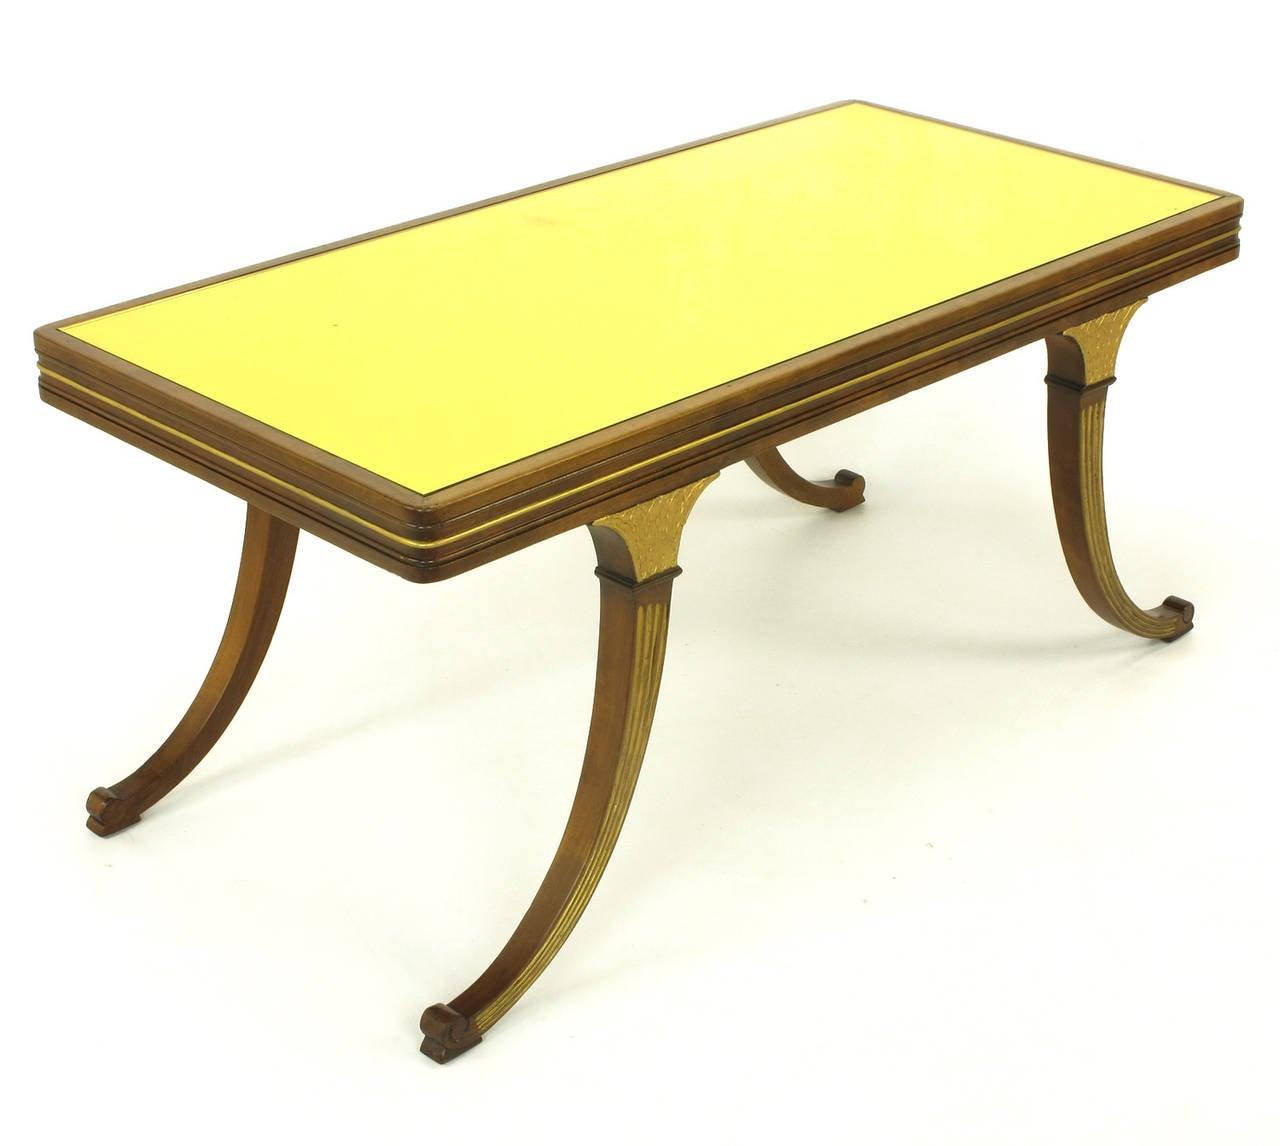 Early 1900s Parcel-Gilt and Walnut Empire Coffee Table with Gold Mirror Top In Good Condition For Sale In Chicago, IL